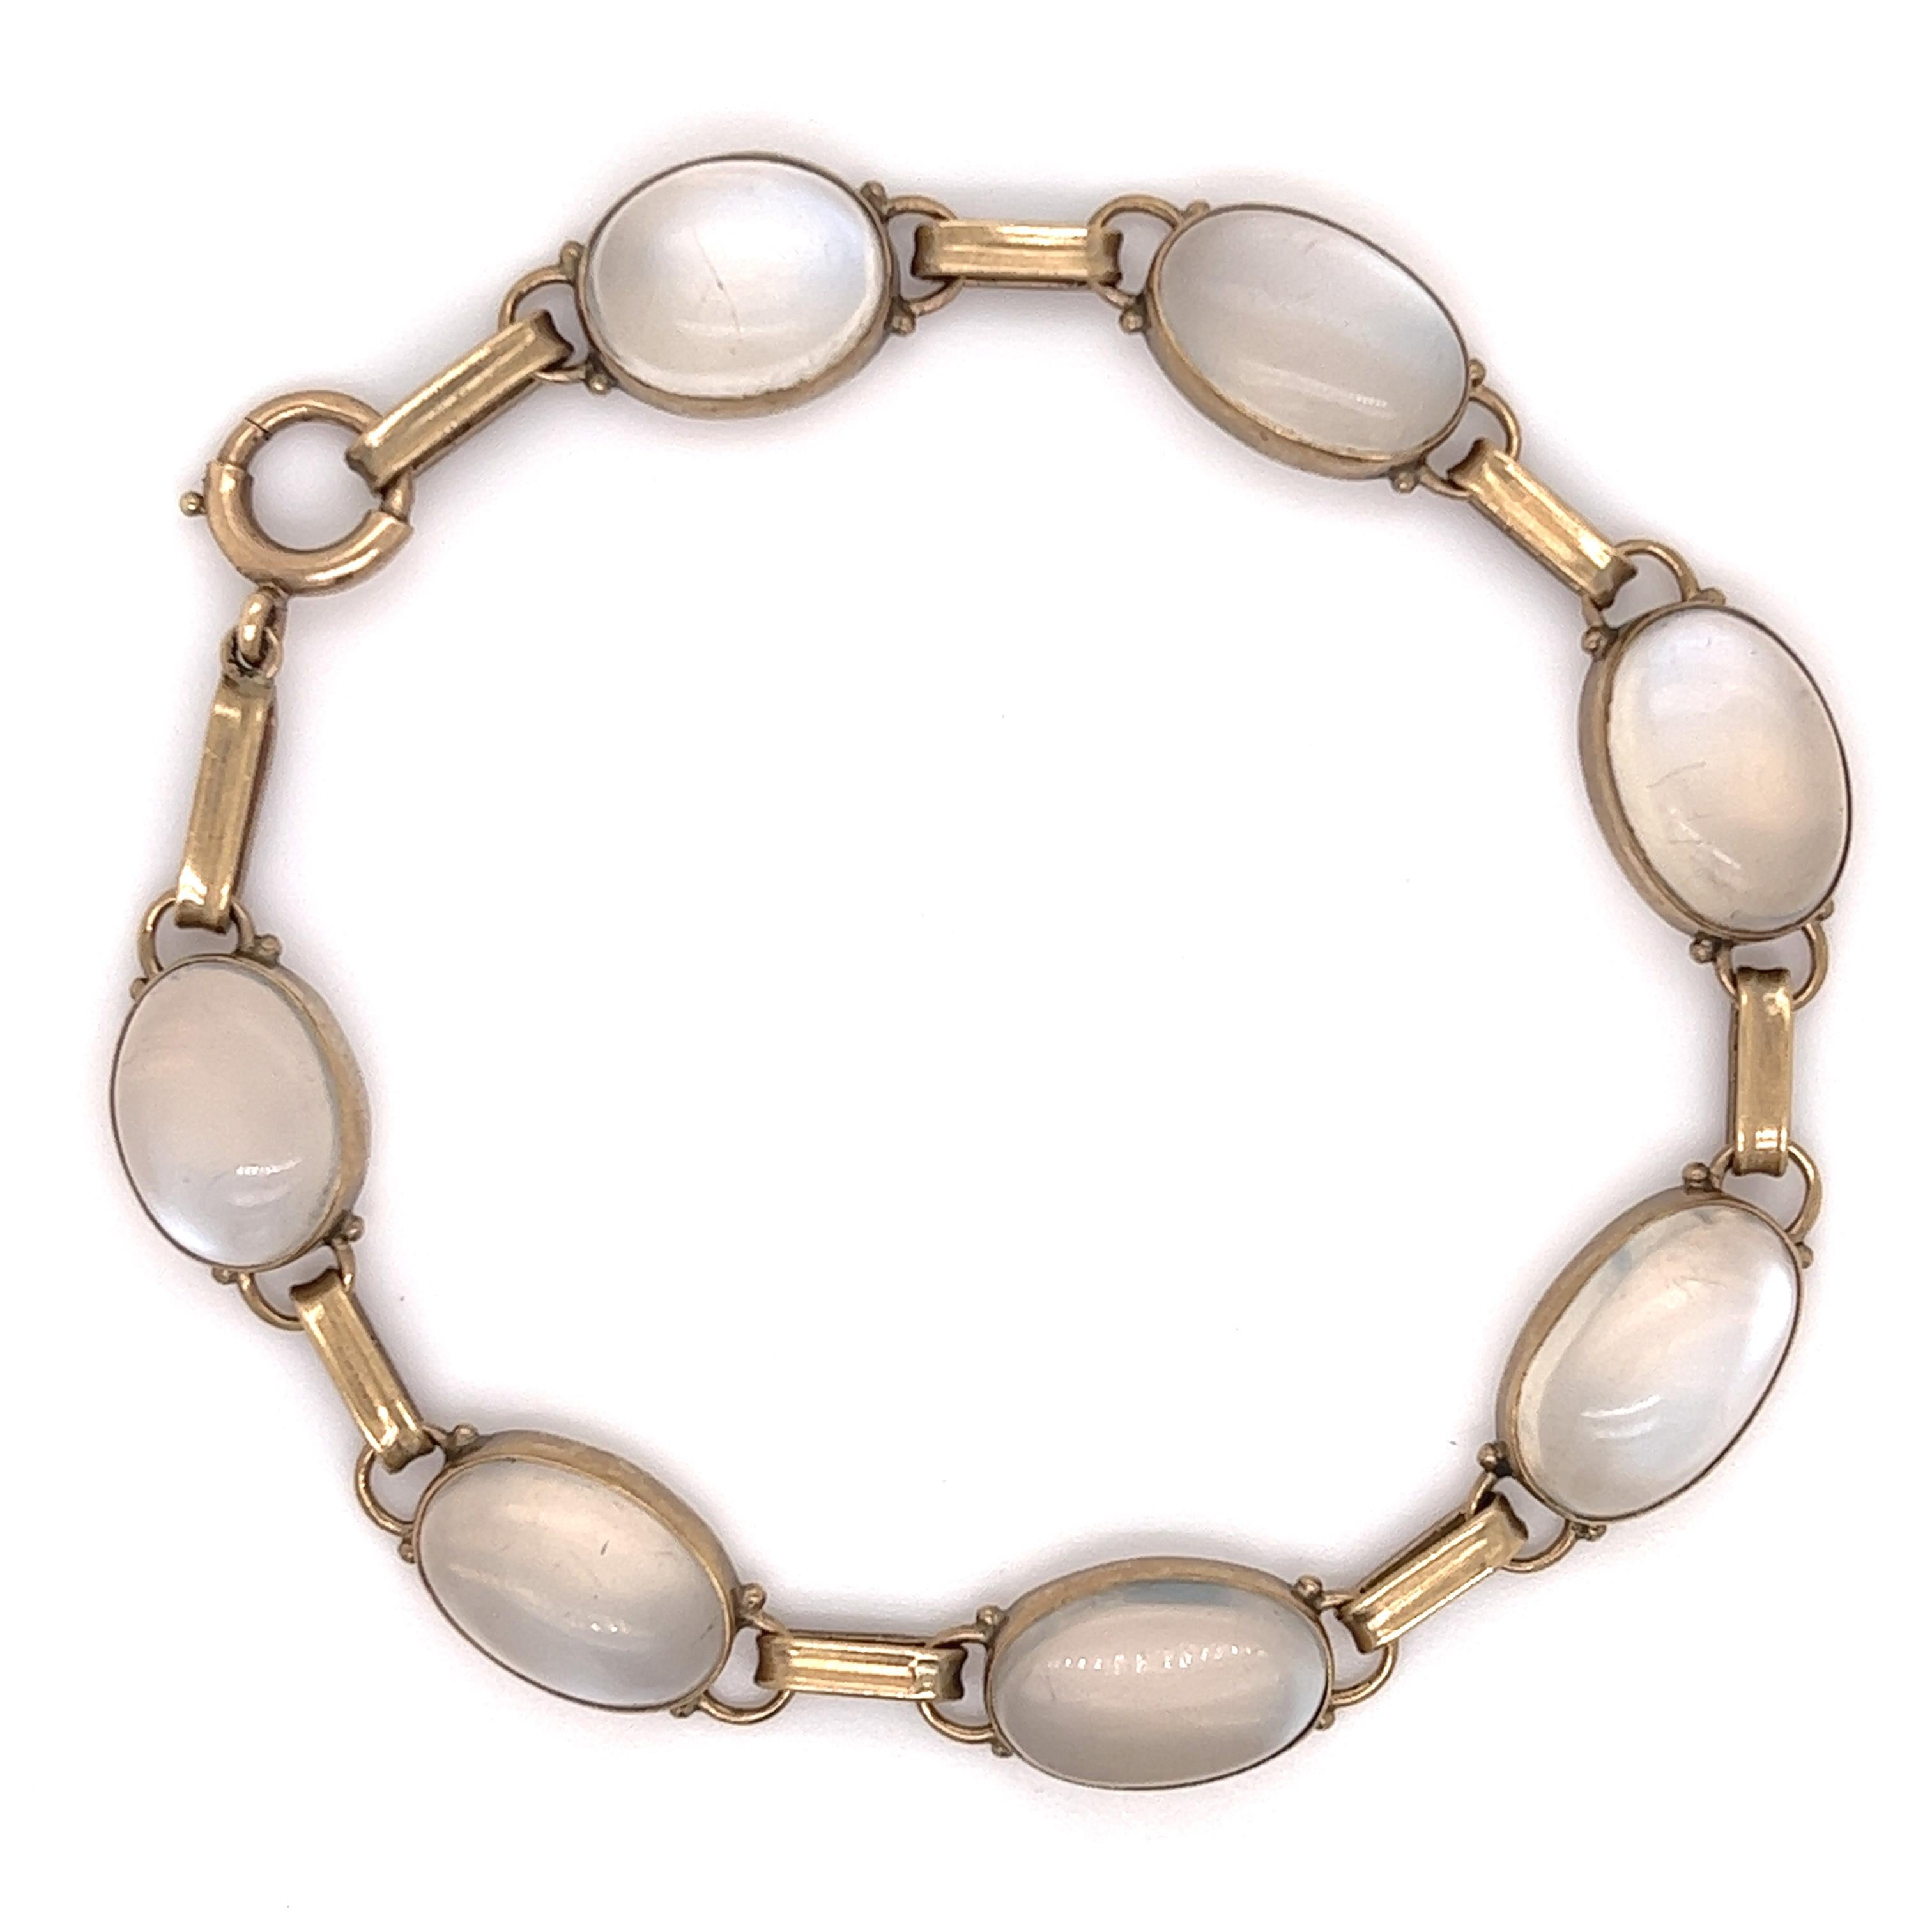 Gorgeous design seen on this mid century masterpiece. Simple yet elegant this bracelet is set with seven softly shimmering oval moonstones with faint bluish overtones that glow from within rosy-yellow gold bezels in this straightforward link